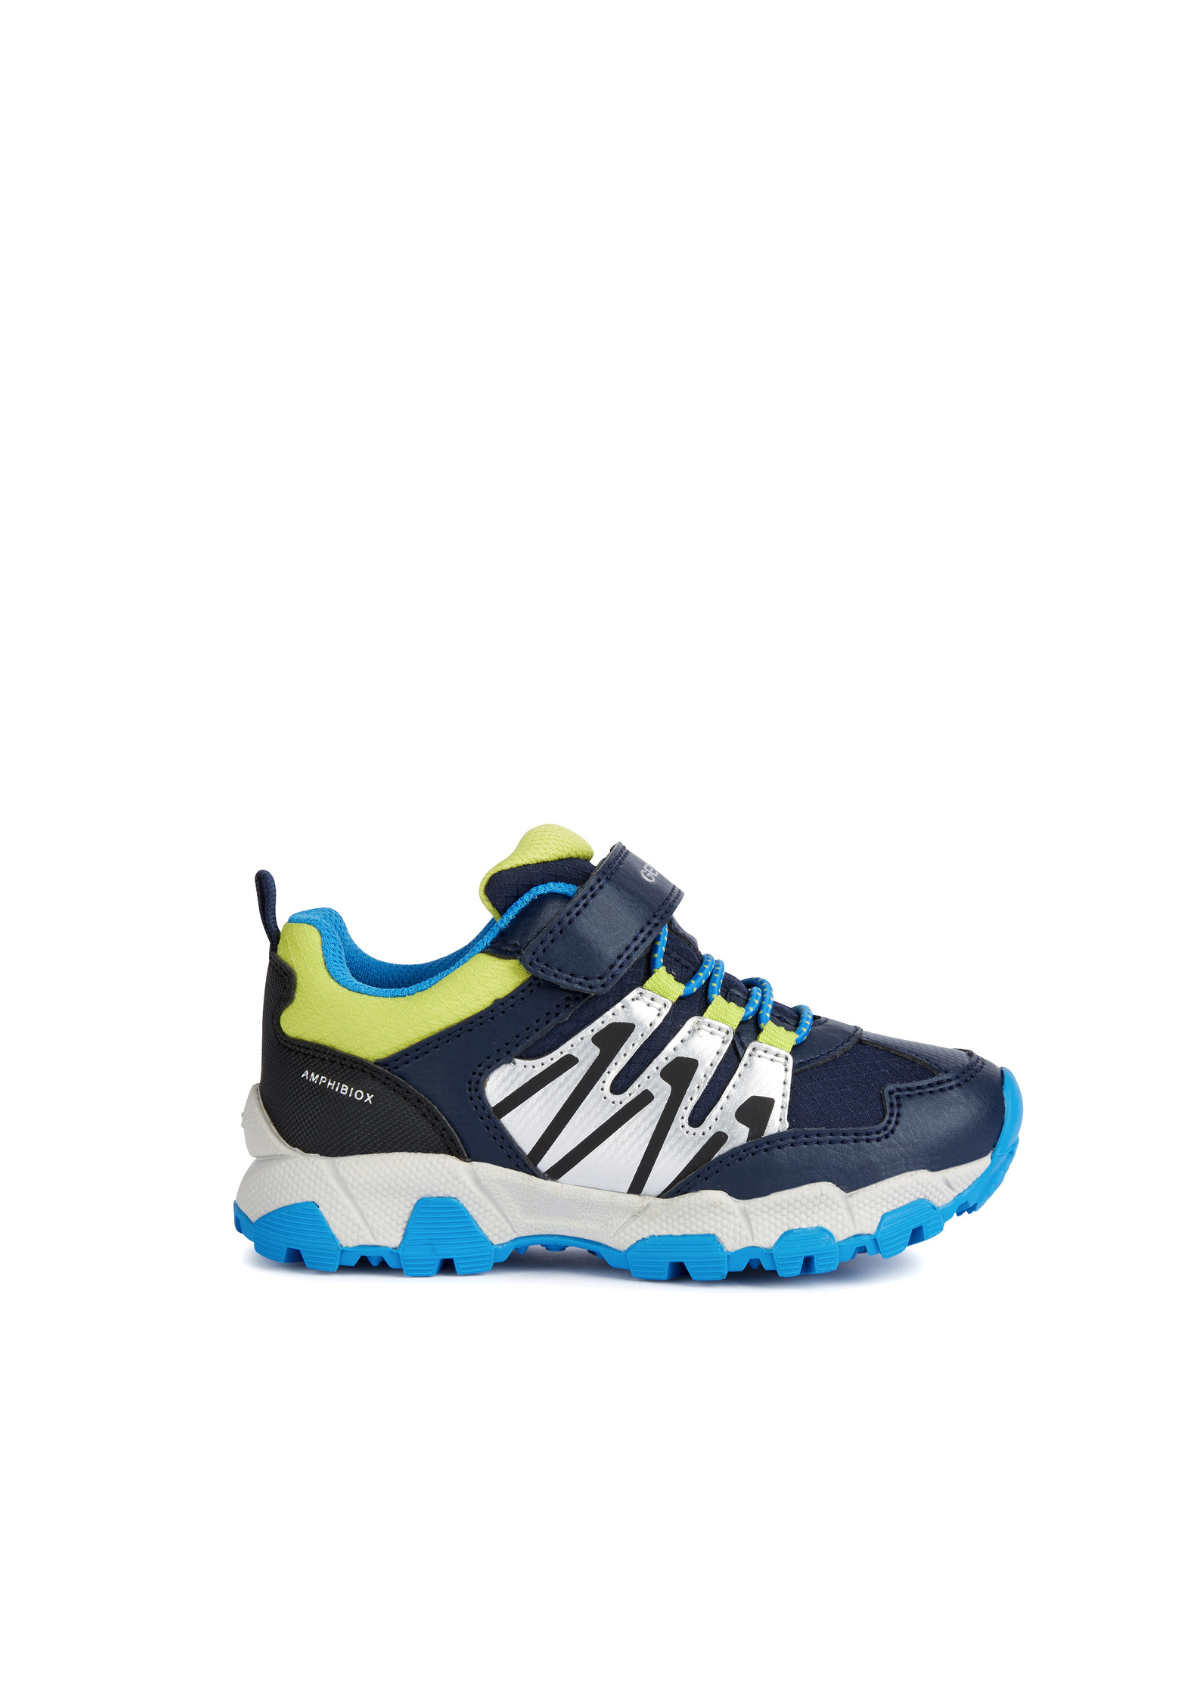 Geox Boys Trainers Magnetar Navy Lime